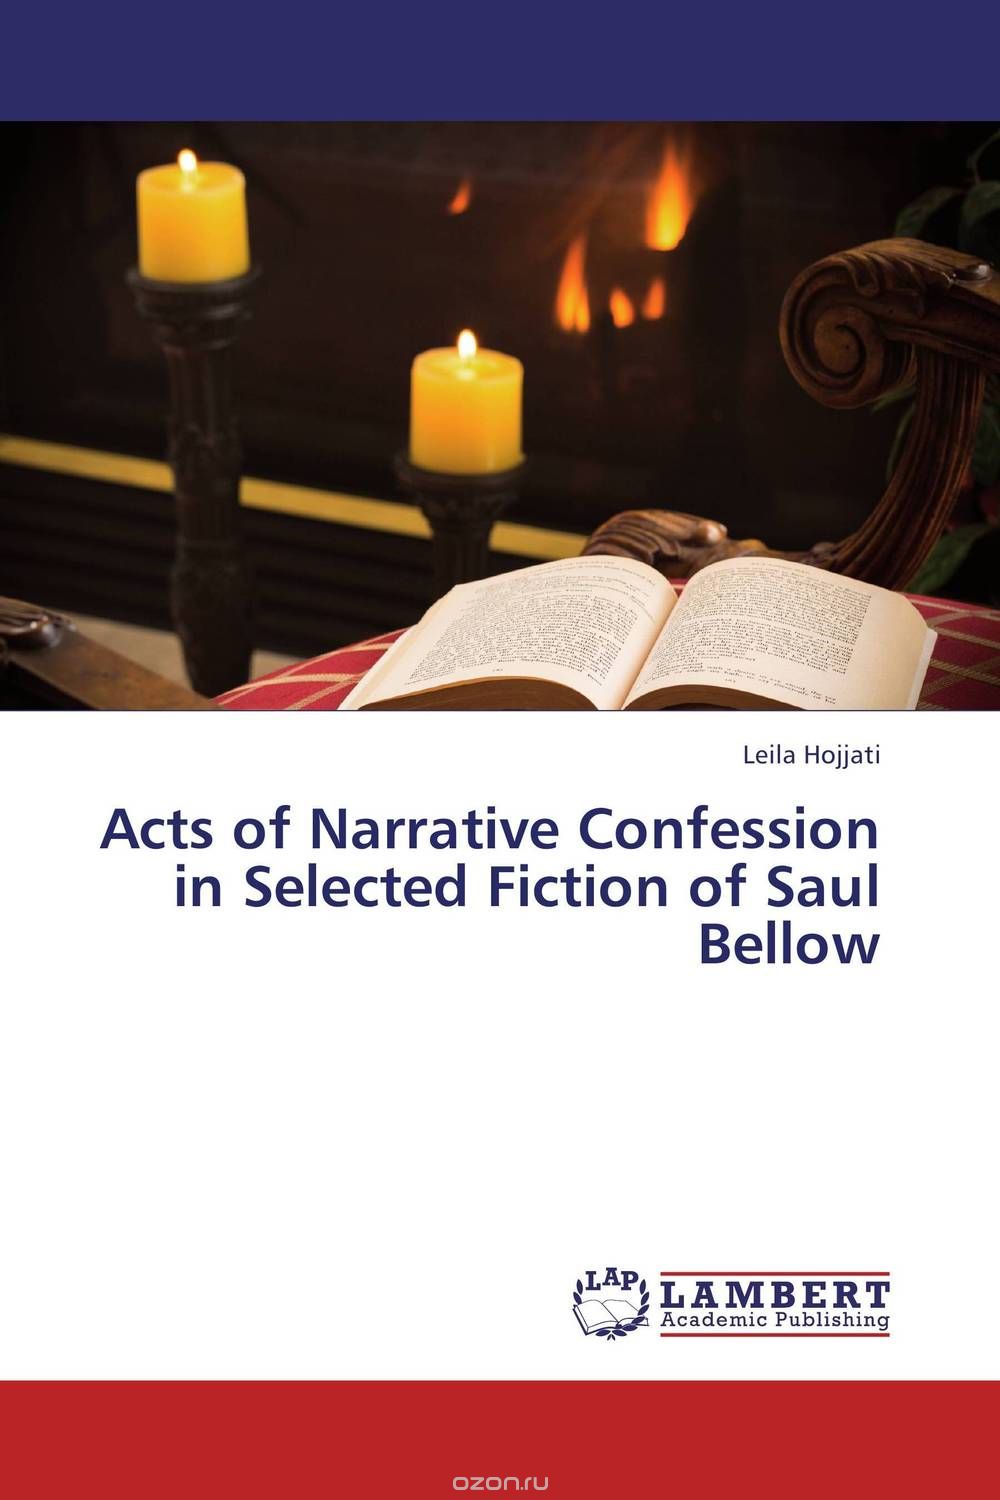 Acts of Narrative Confession in Selected Fiction of Saul Bellow